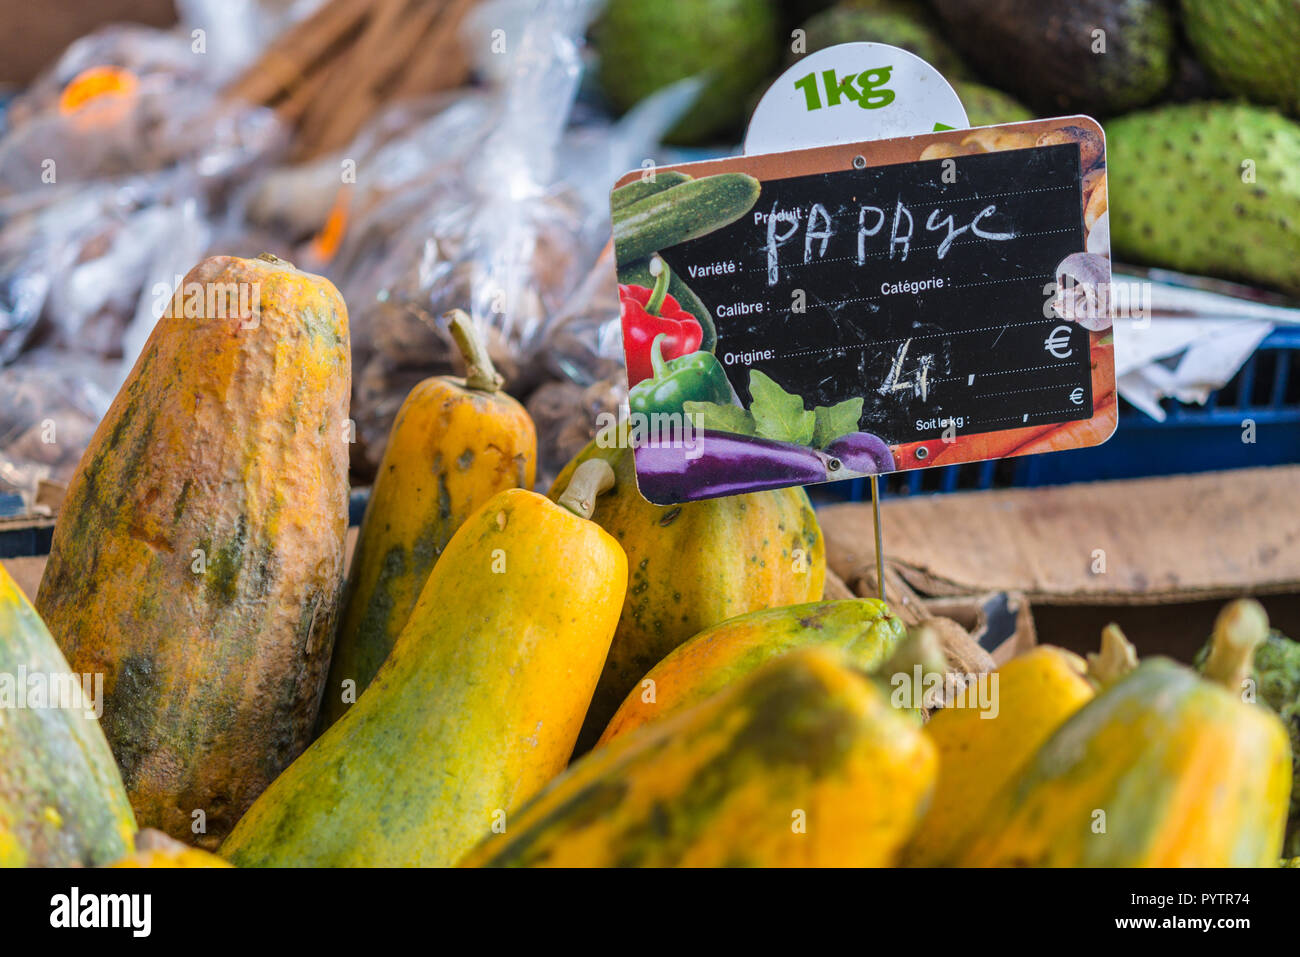 Fort-de-France, Martinique - December 19, 2016: Papaya with price in the fruit and vegetable market of Fort de France in Martinique, Lesser Antilles,  Stock Photo